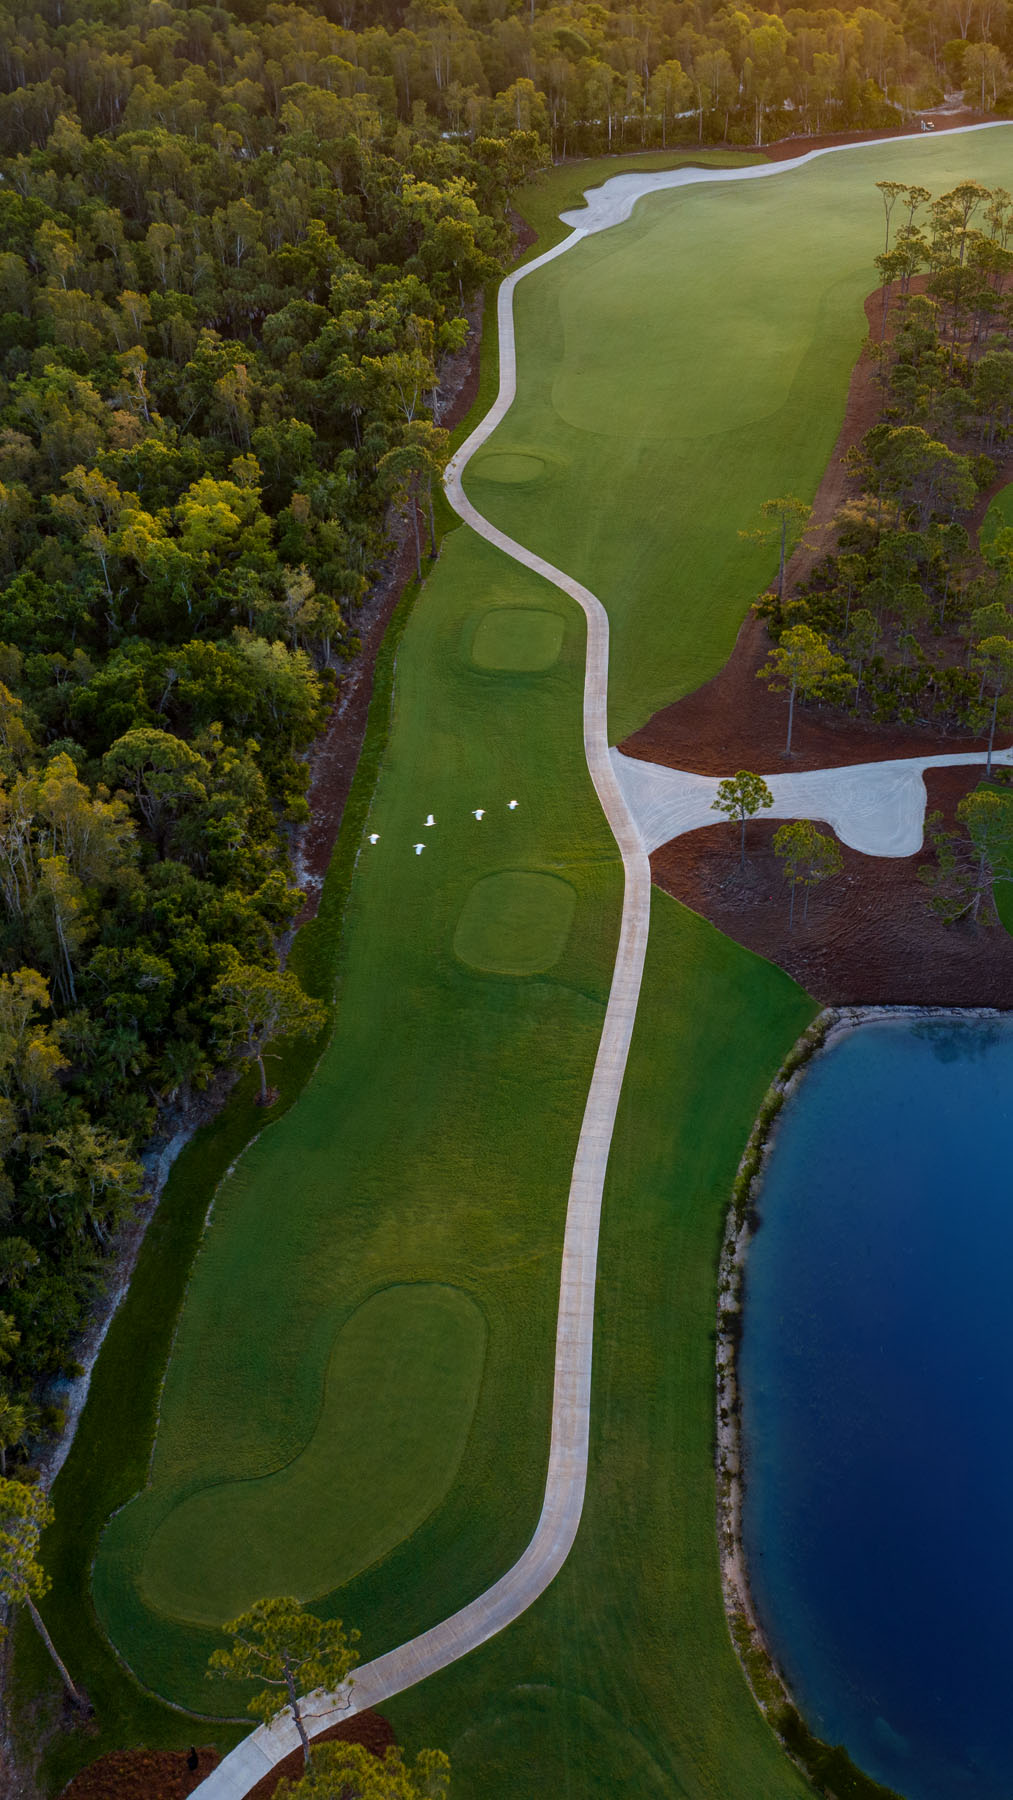 Aerial view of a golf course with a winding path, green fairways, water hazard, and adjacent forest. A group of white birds is present on the fairway.